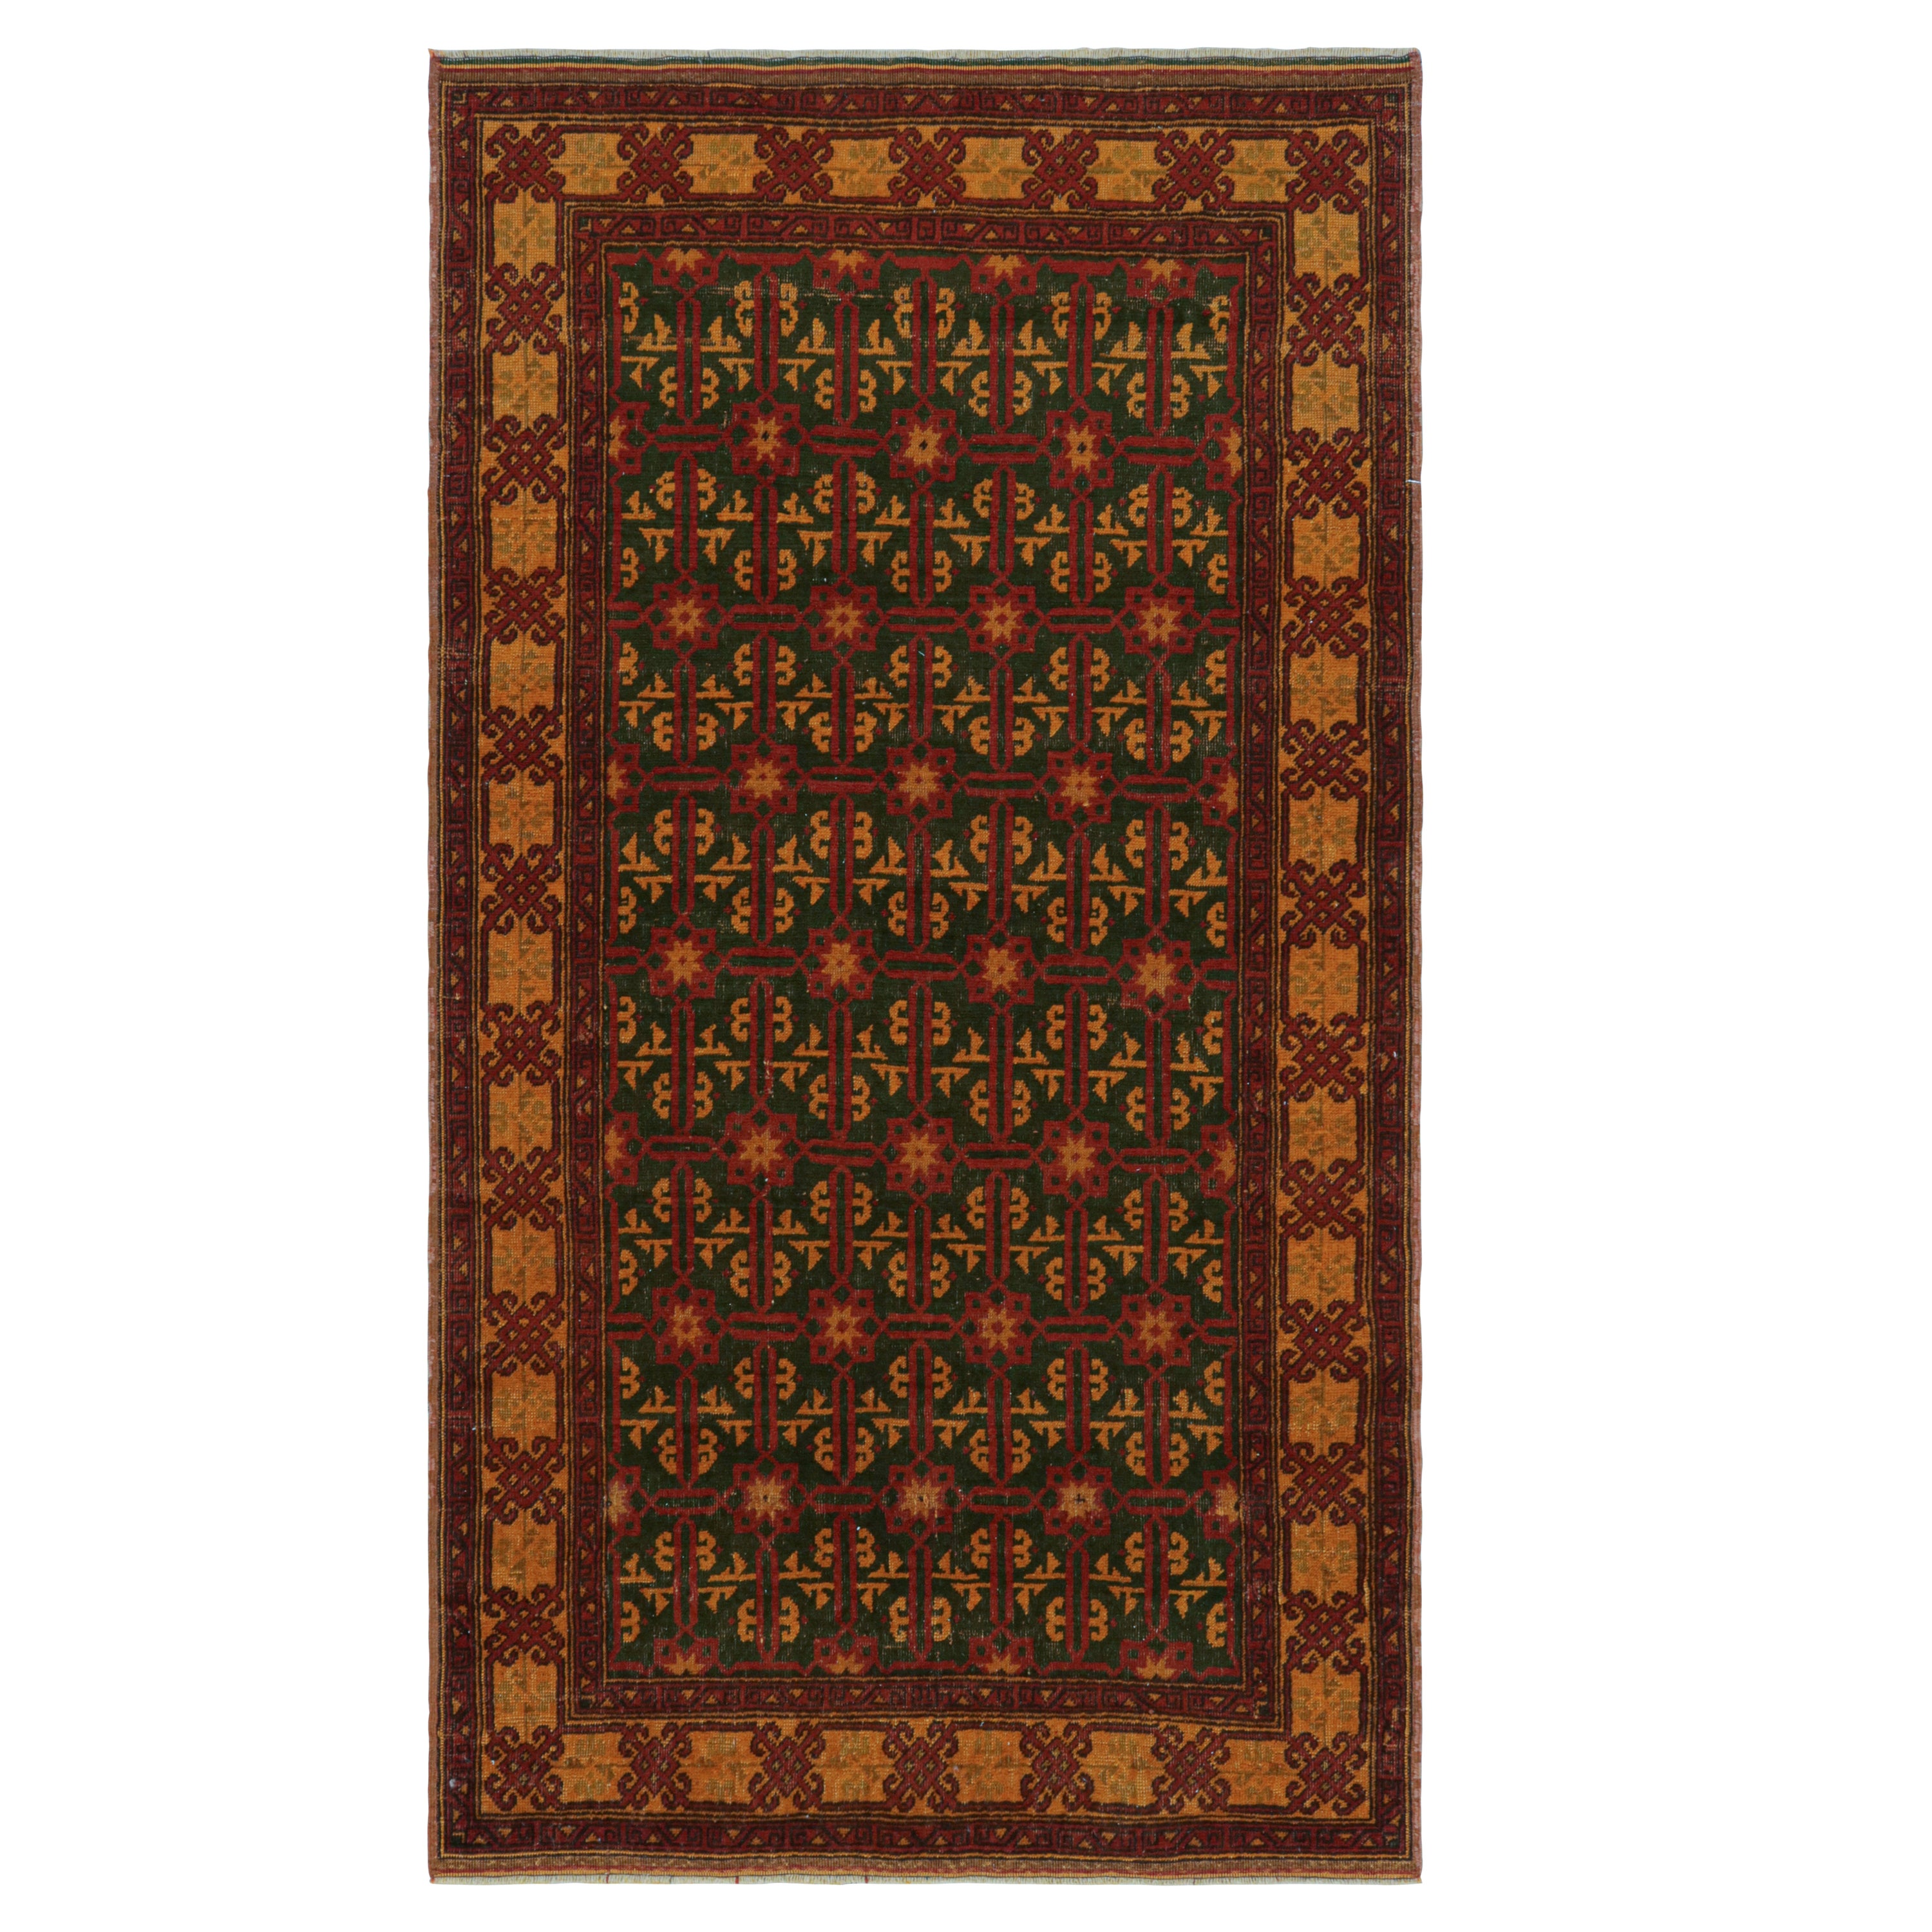 Vintage Mid-Century Geometric Floral Red And Green Wool Rug - Orange-Brown Accen For Sale